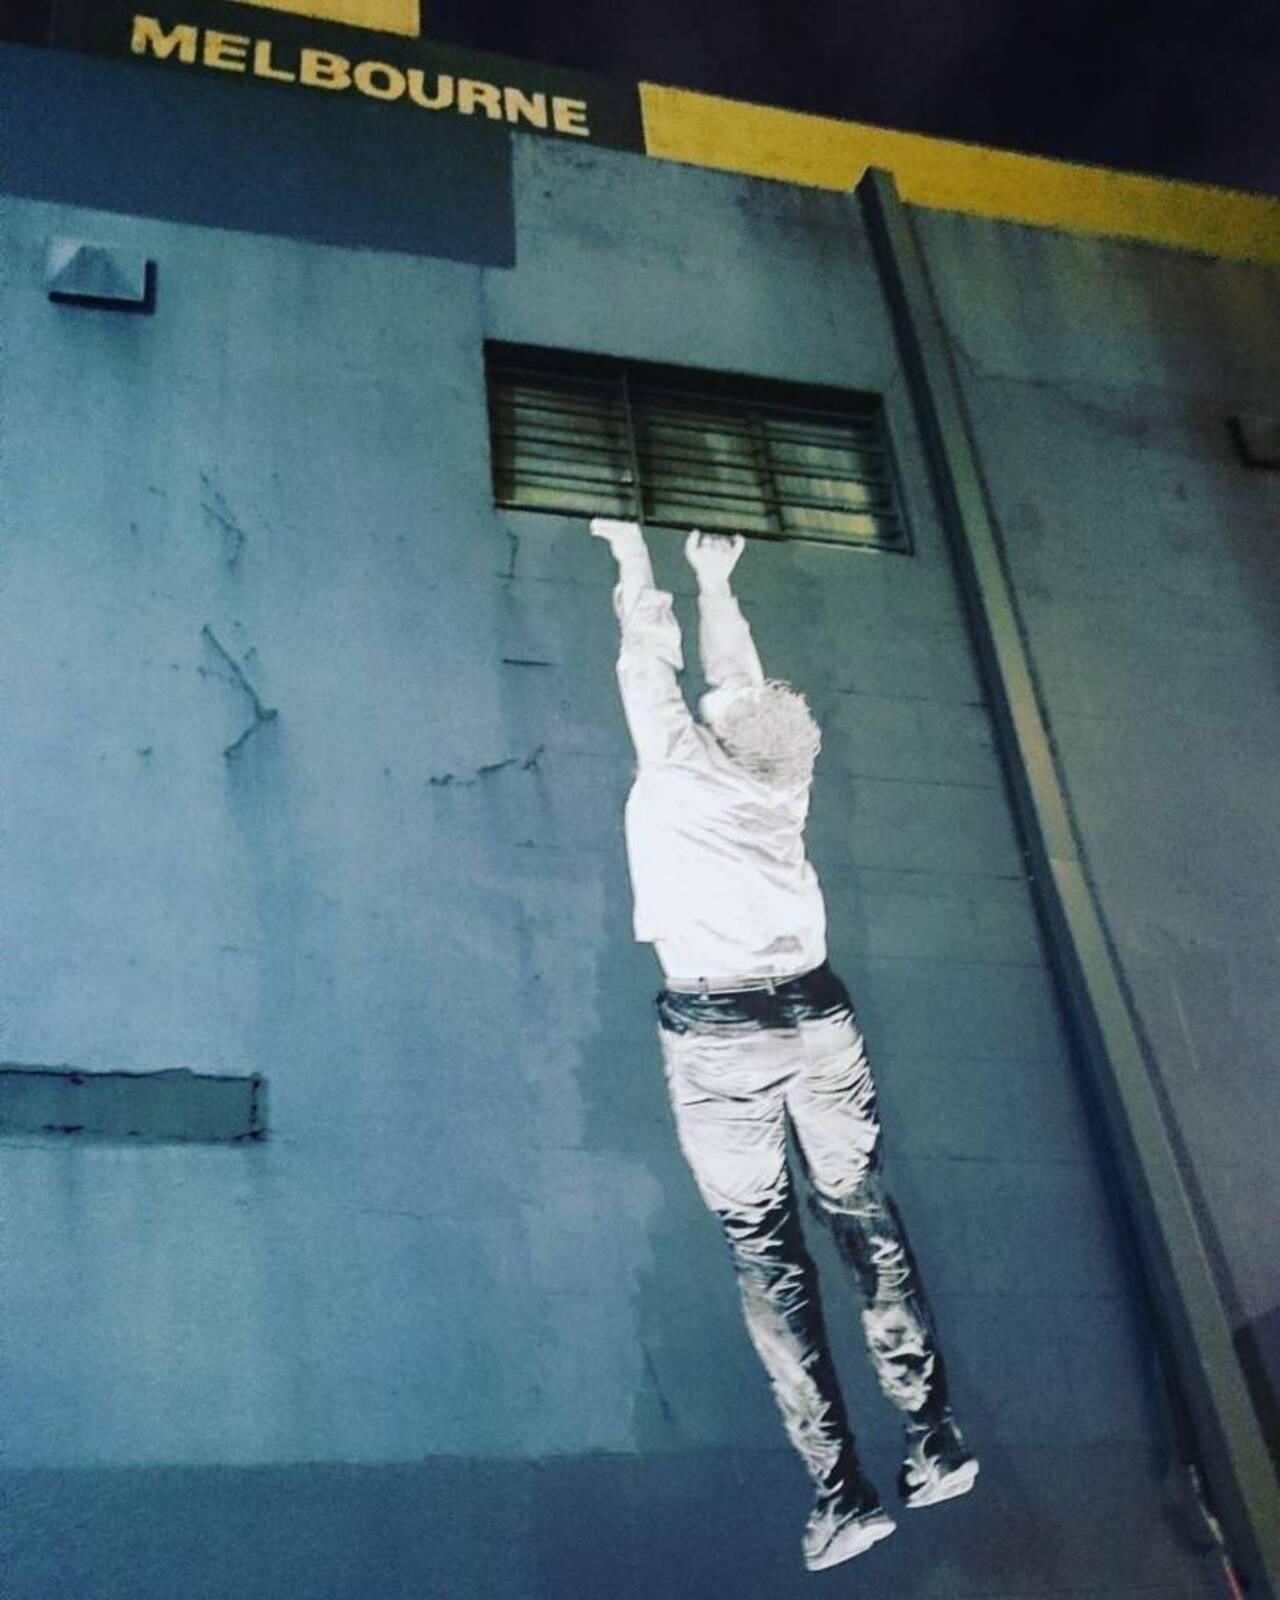 Hanging out in #Melbourne #streetart #graffiti #instagraffiti #instastreetart #streetartmelbourne #graffitiart by m… http://t.co/pLMufVzind